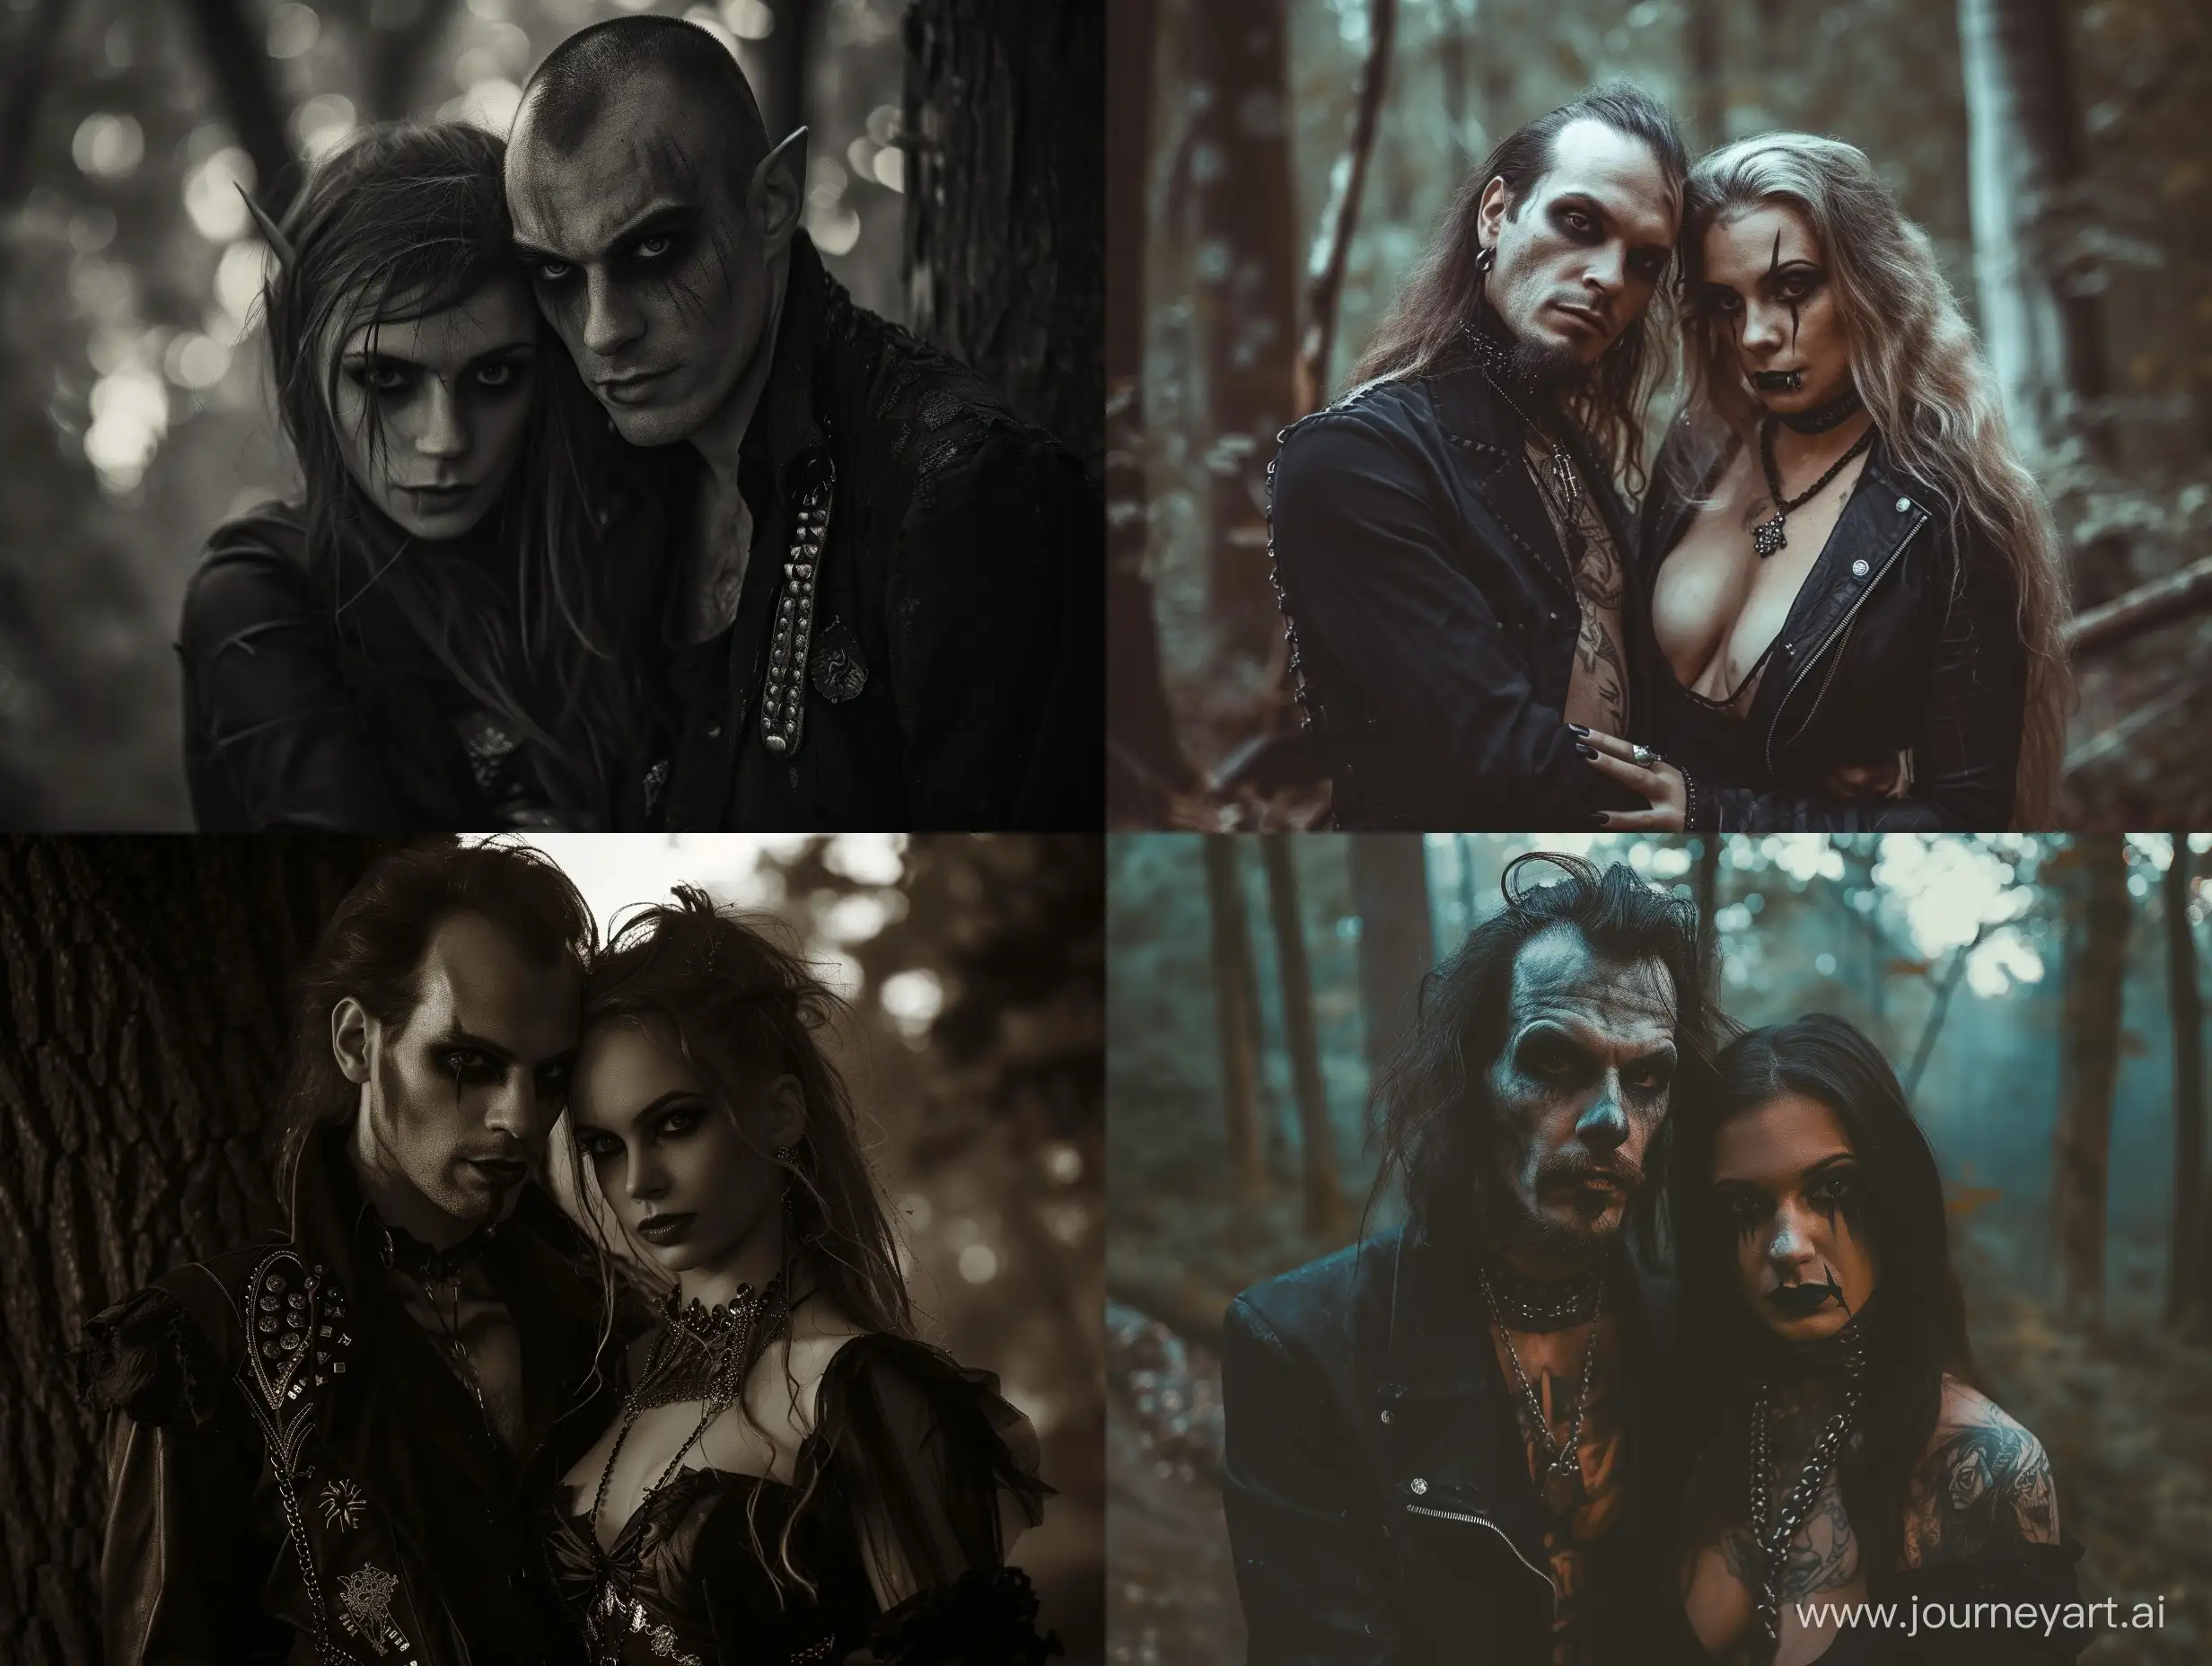 Raw-Gothic-Romance-Intense-Vampire-Couple-in-a-Metalinfused-Woodland-Scene